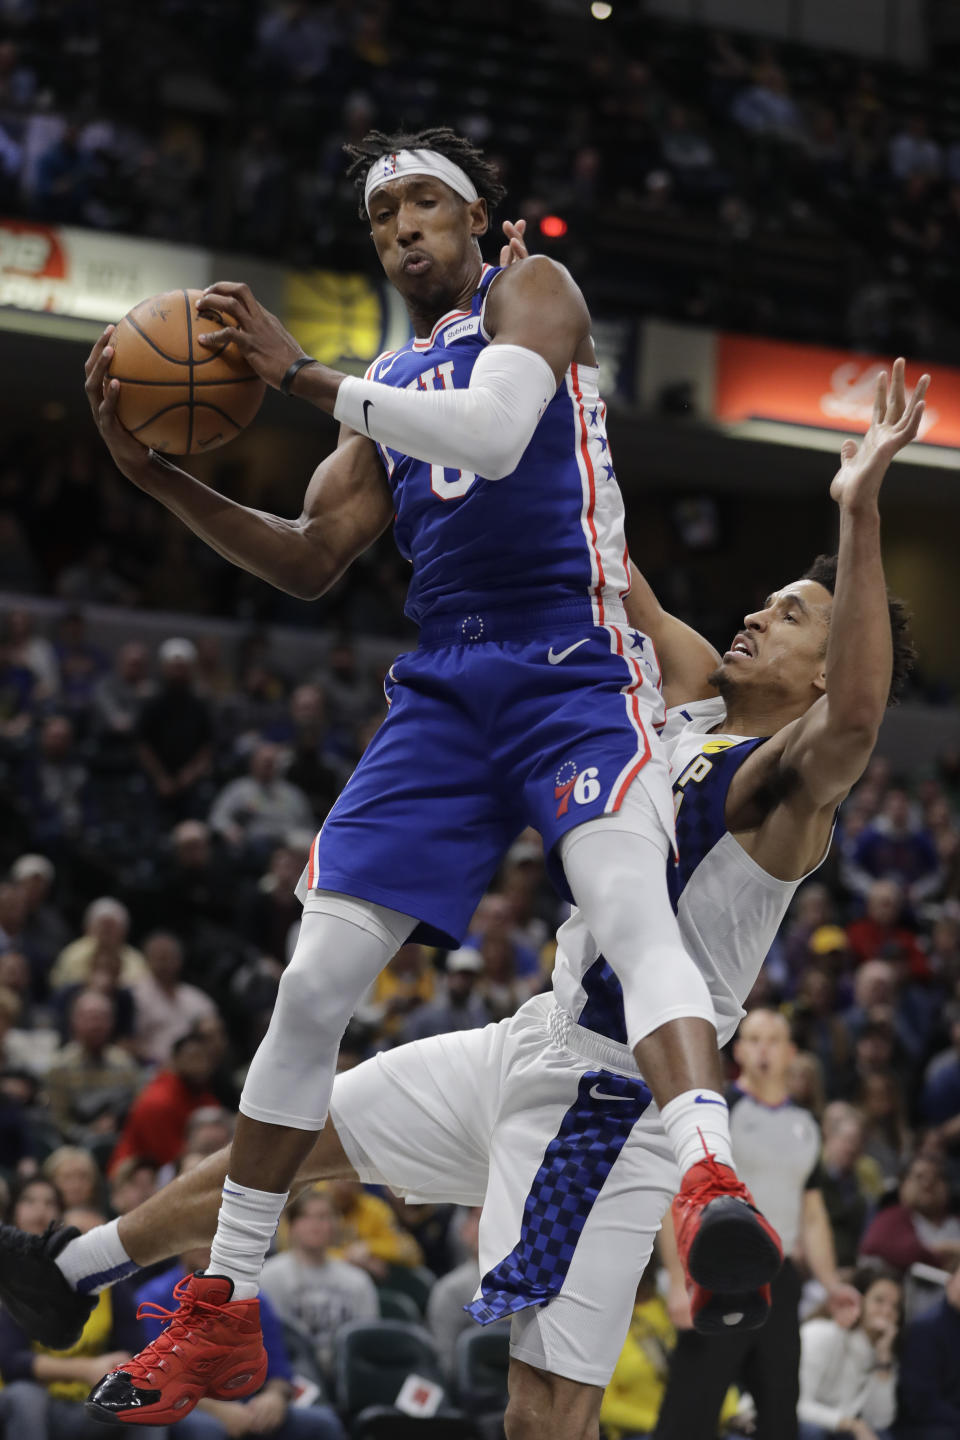 Philadelphia 76ers' Josh Richardson grabs a rebound against Indiana Pacers' Malcolm Brogdon (7) during the second half of an NBA basketball game, Monday, Jan. 13, 2020, in Indianapolis. Indiana won 101-95. (AP Photo/Darron Cummings)